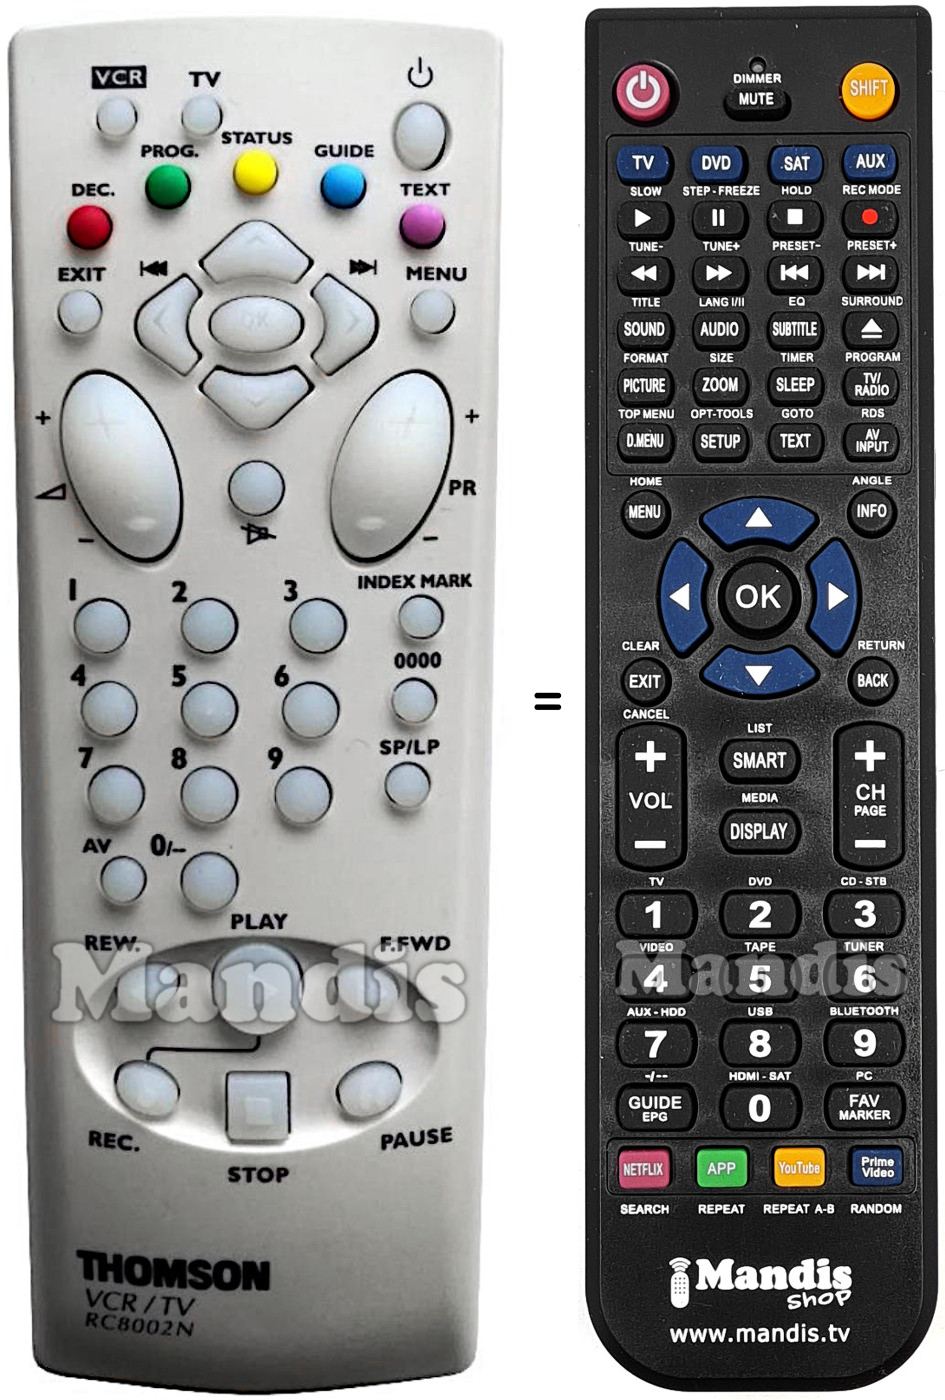 Replacement remote control RC8002N